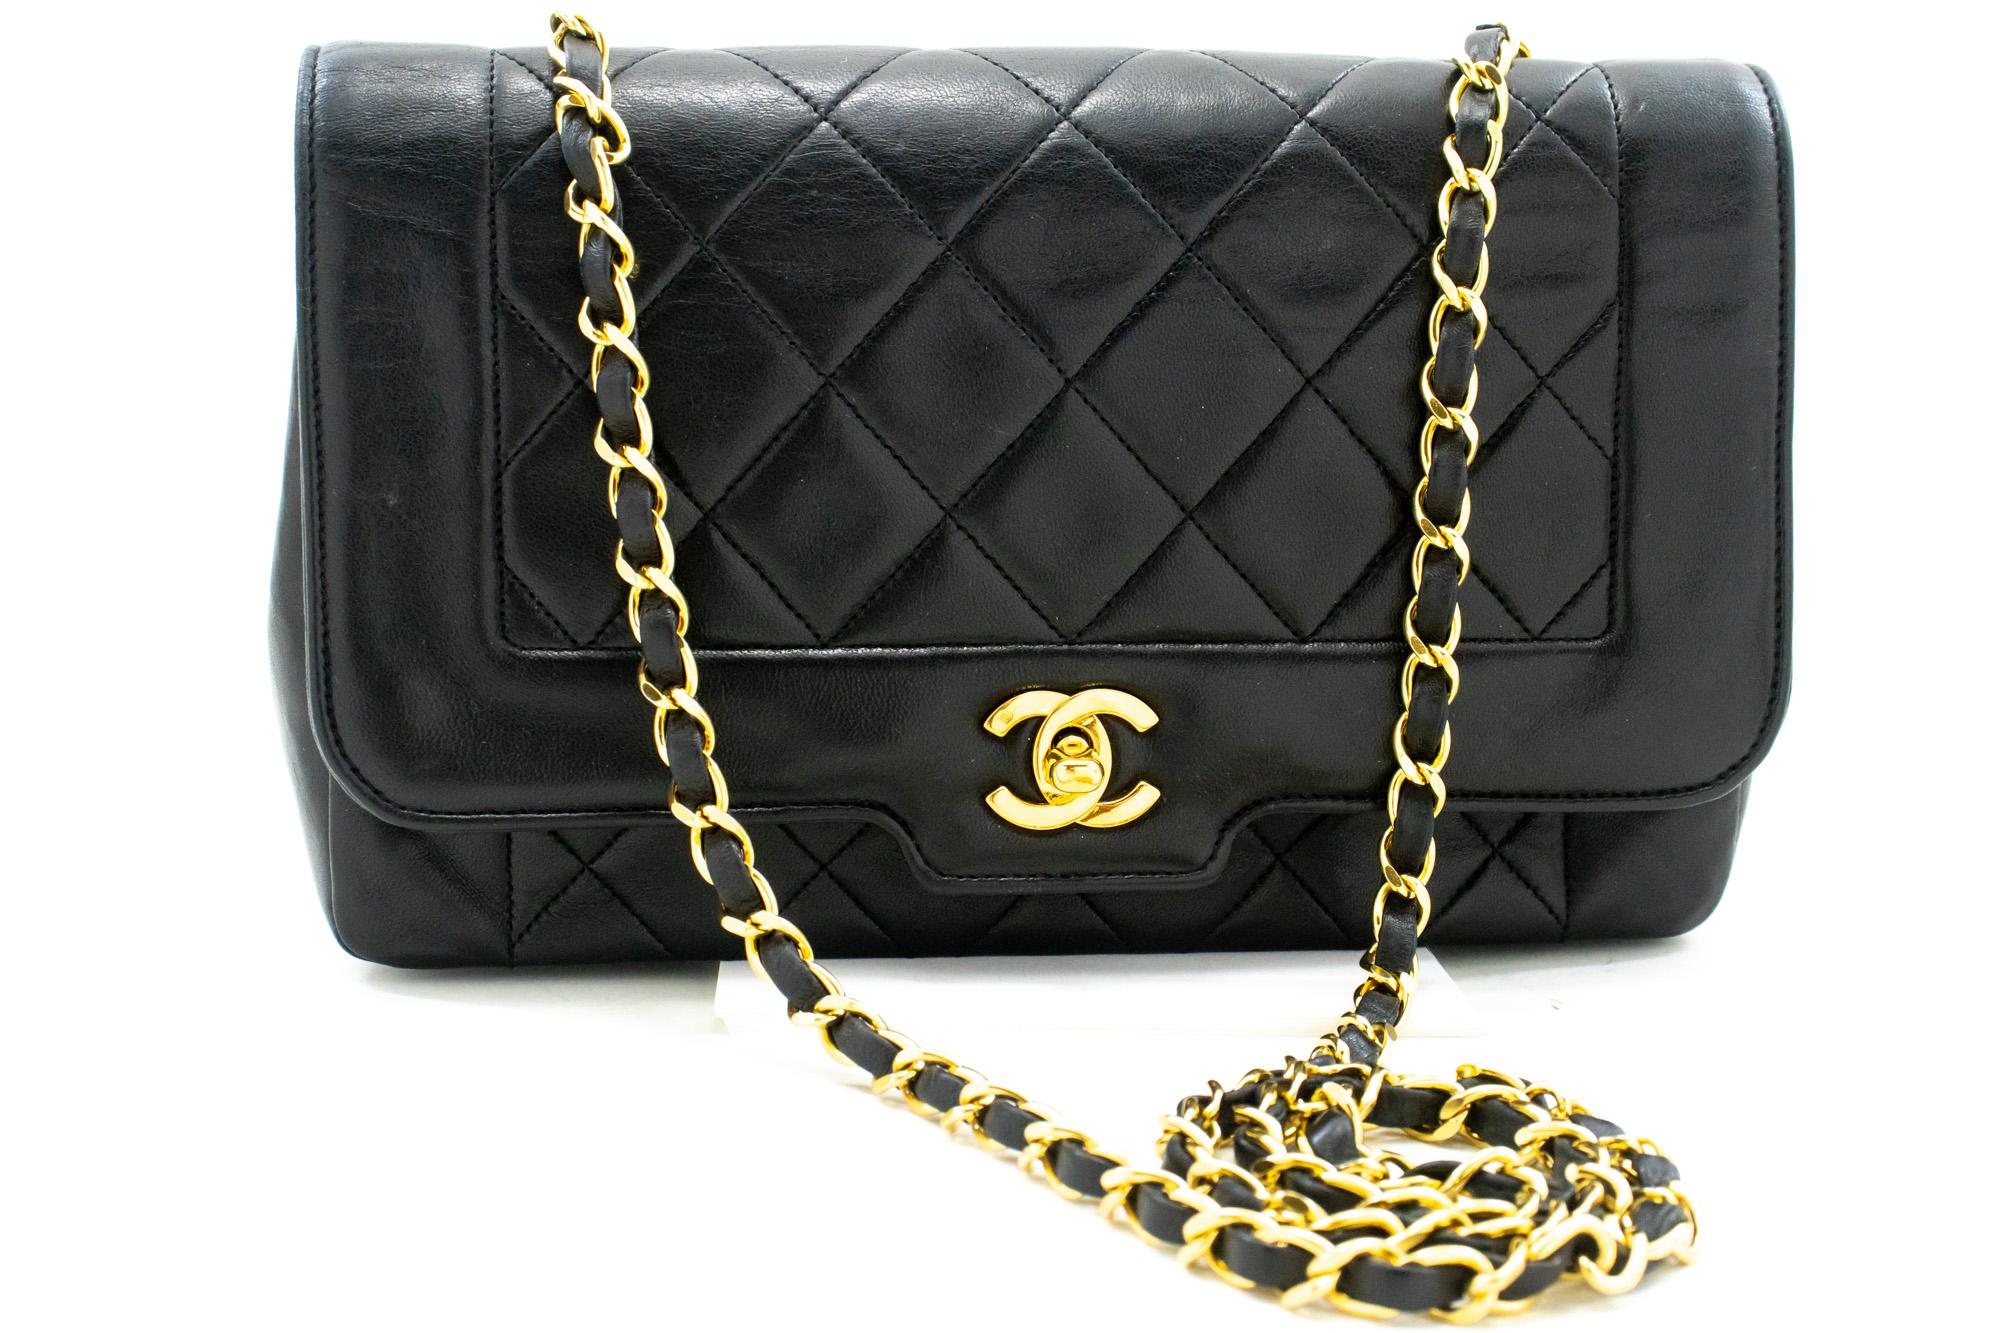 An authentic CHANEL Vintage Medium Chain Shoulder Bag Black made of black Lambskin Quilted. The color is Black. The outside material is Leather. The pattern is Solid. This item is Vintage / Classic. The year of manufacture would be